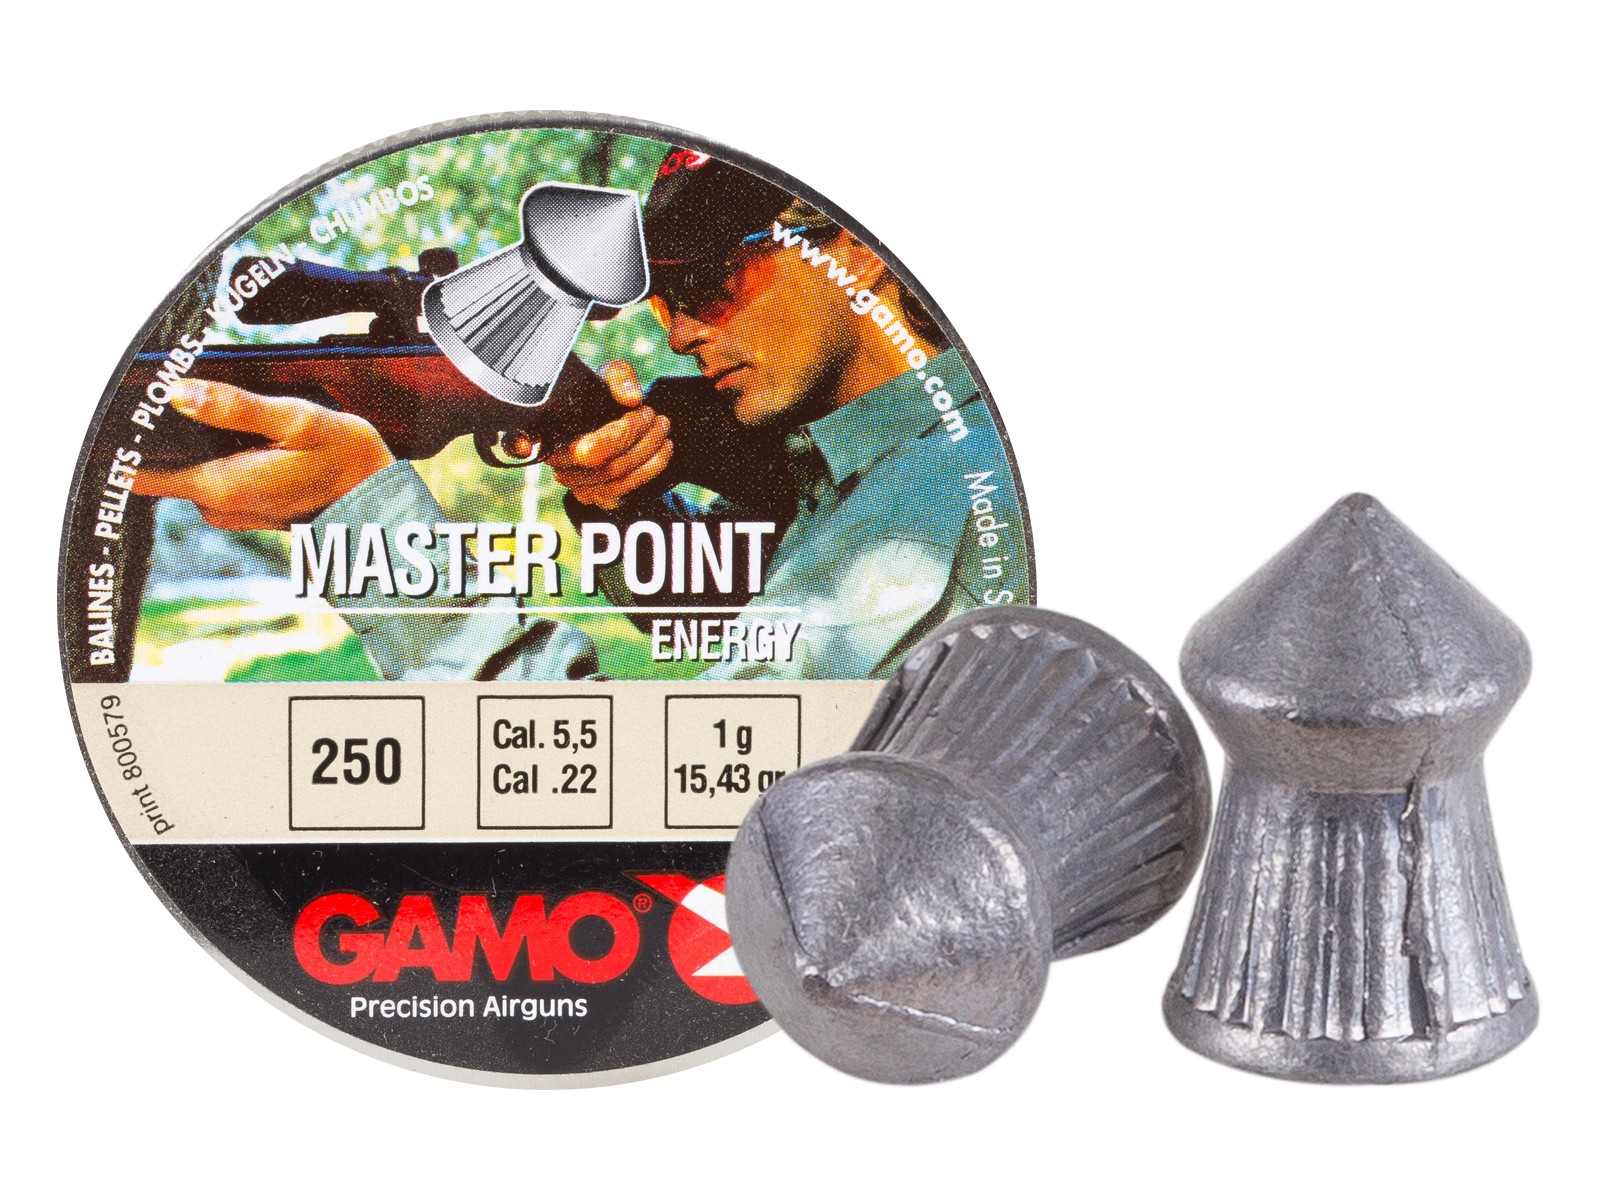 Gamo Master Point .22 Cal, 15.43 Grains, Pointed, 250ct